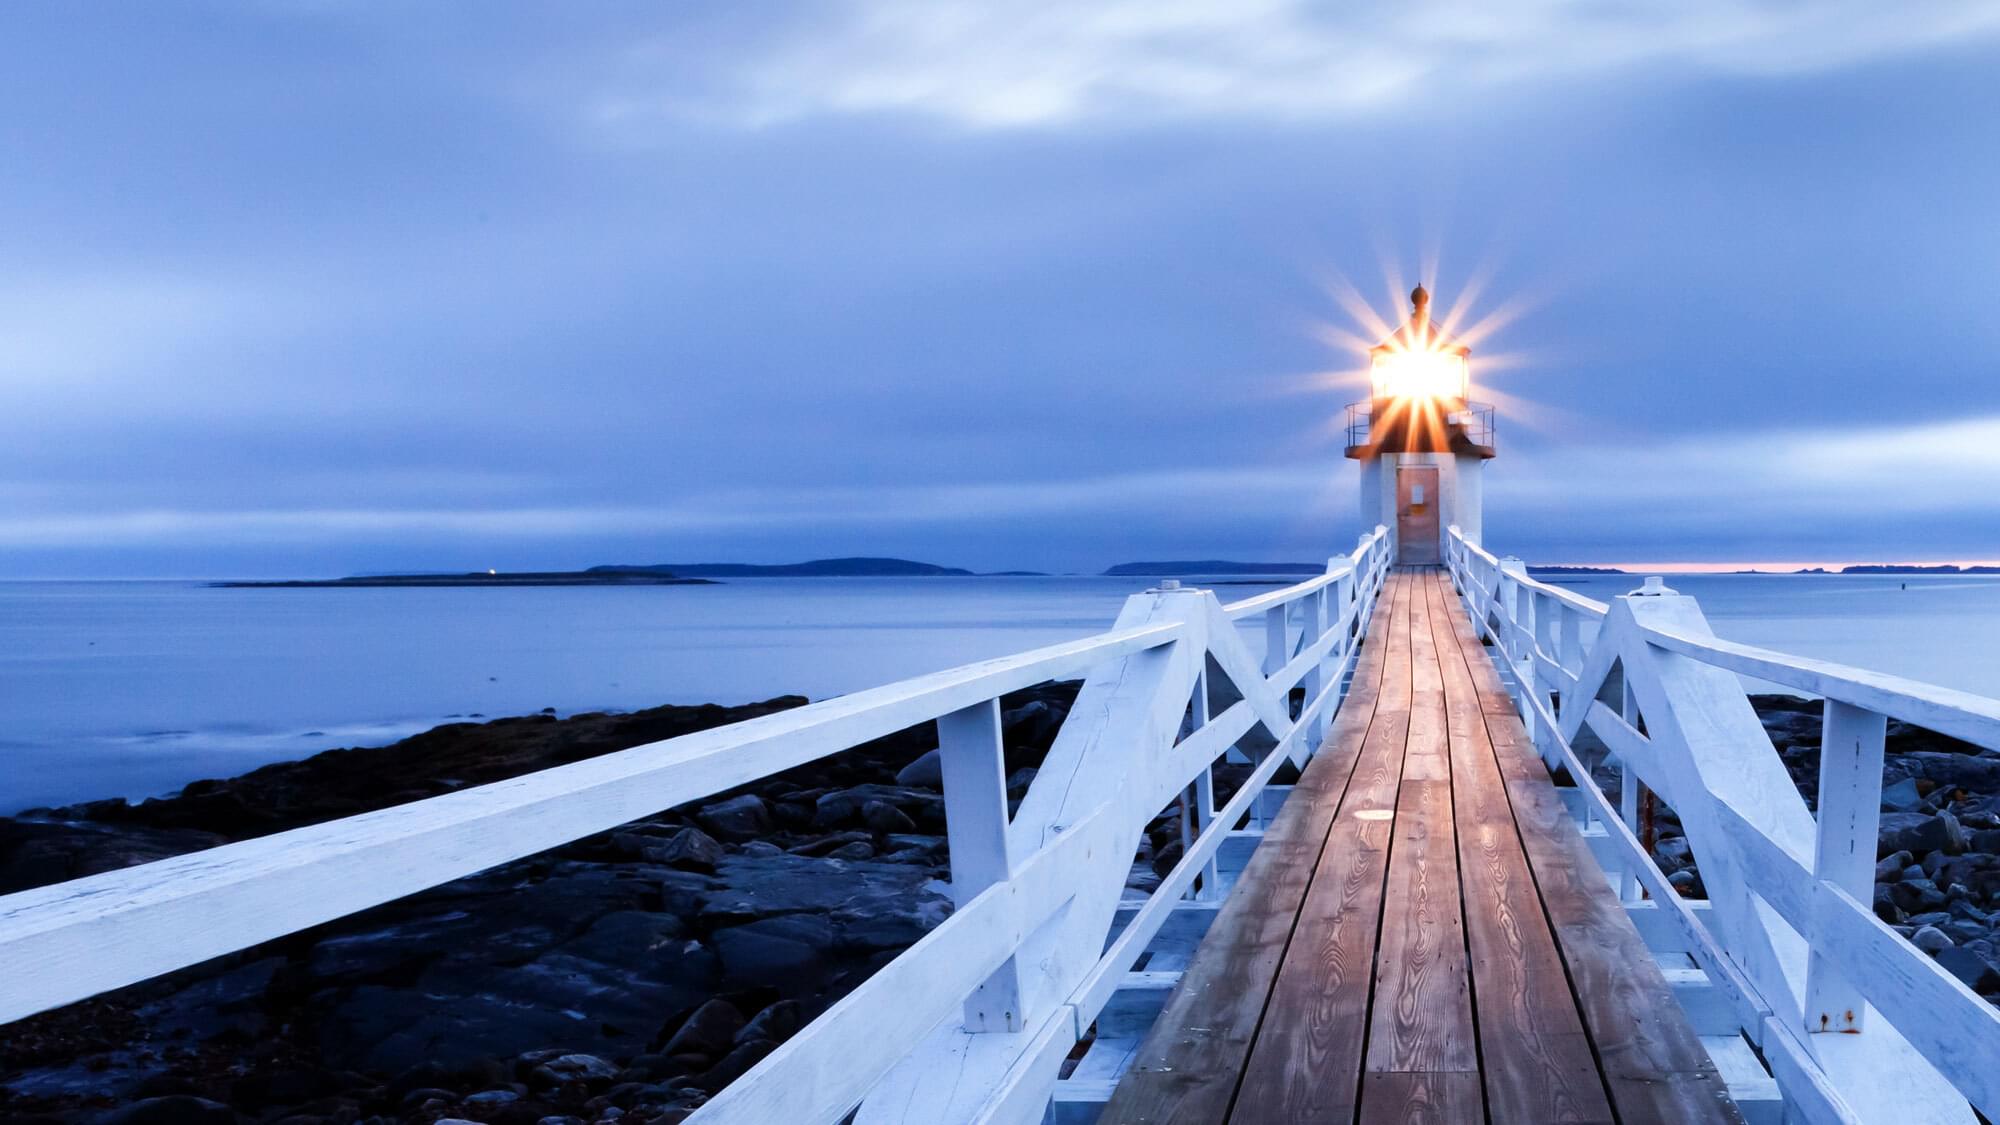 A lighthouse at the end of a wooden jetty.